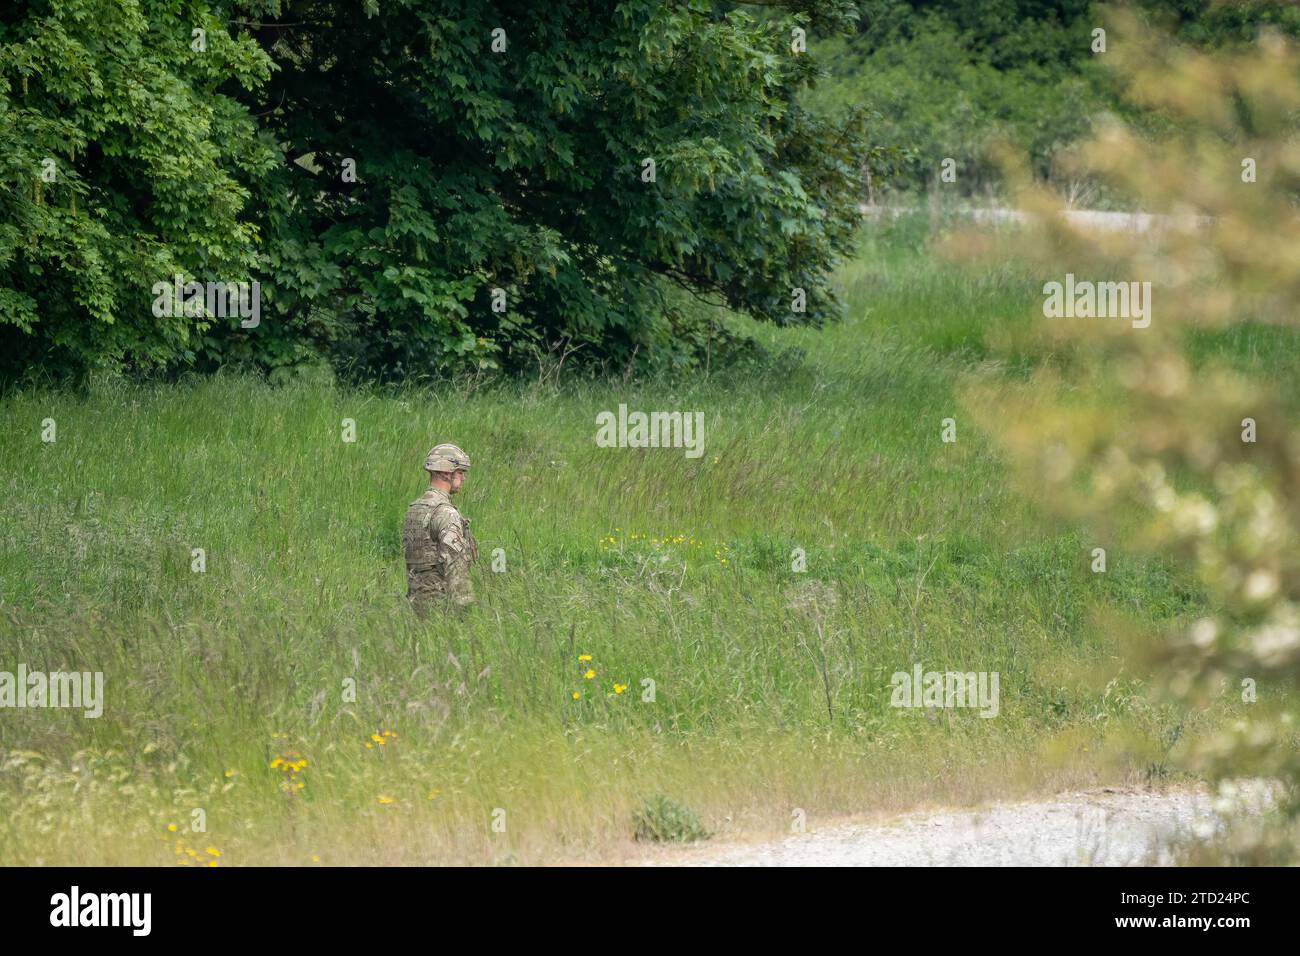 British army soldier moving through long grass Stock Photo